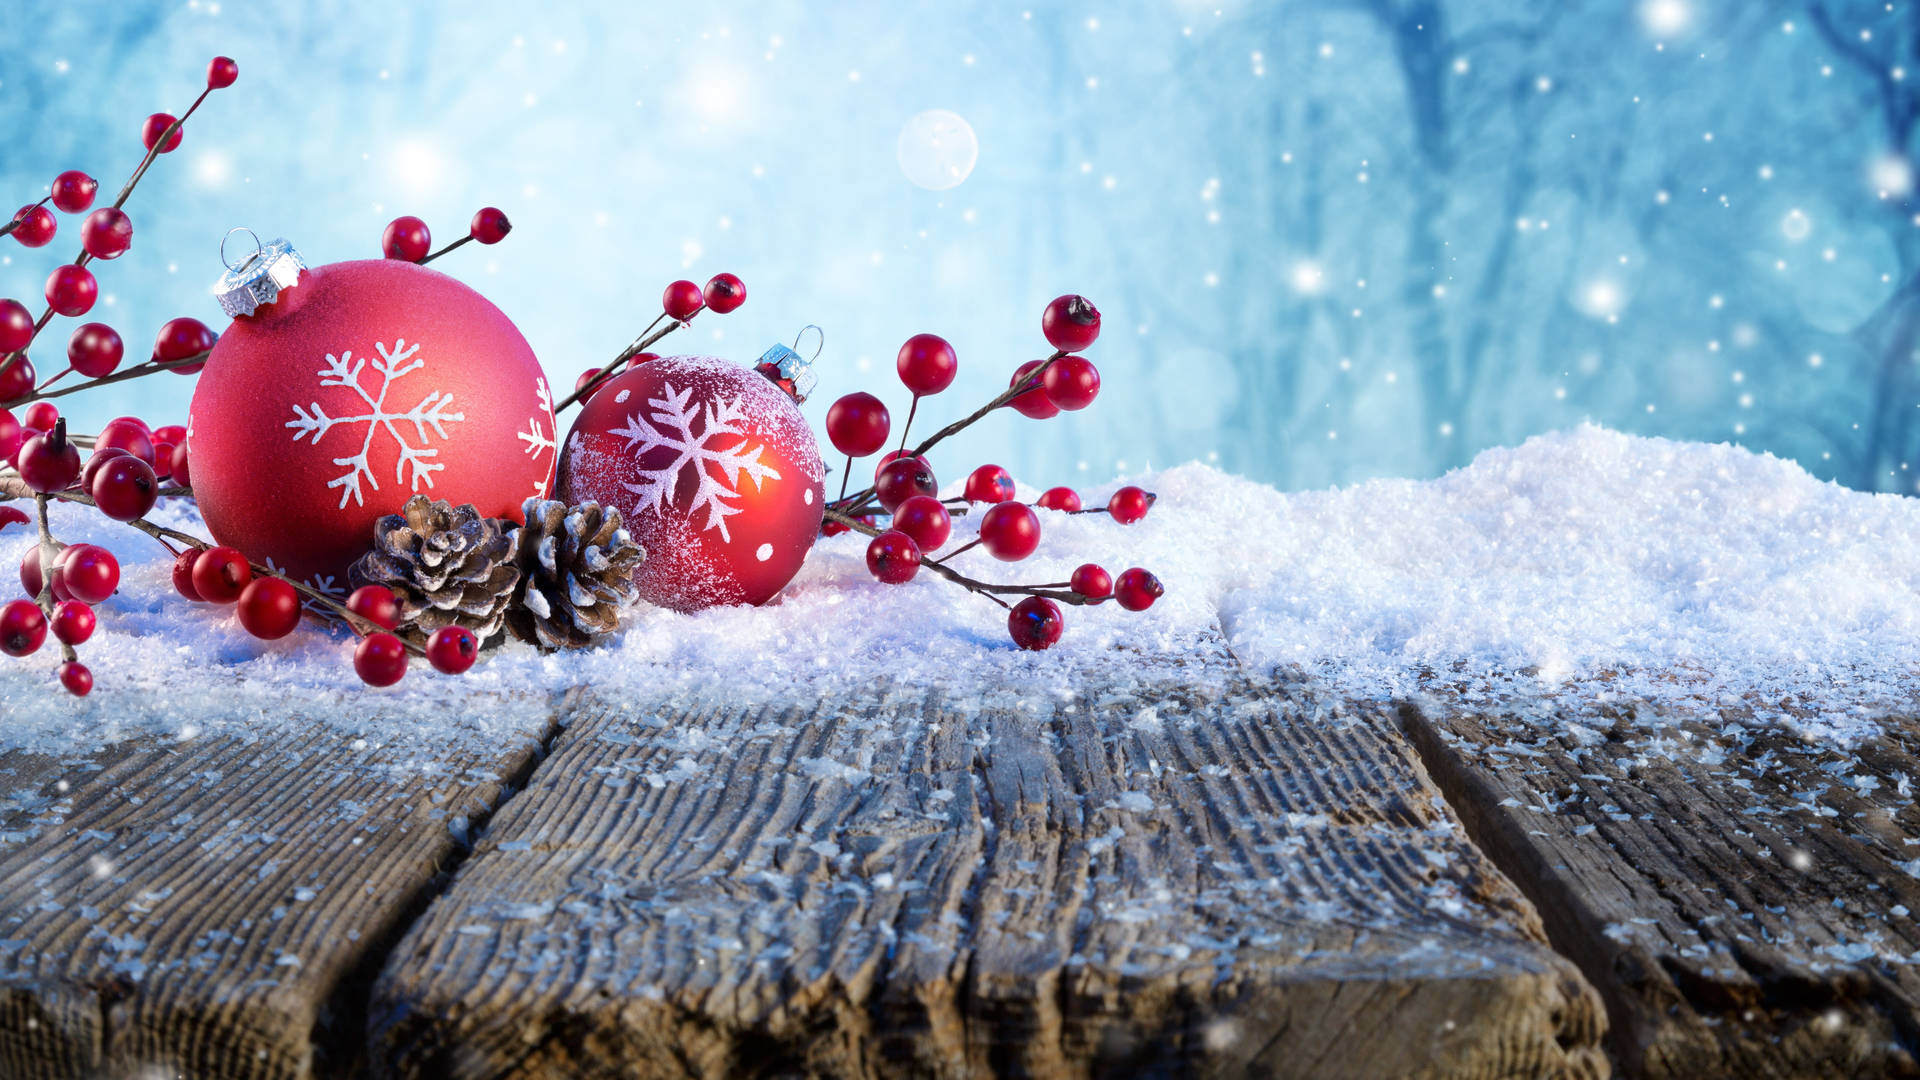 Pine Cone And Red Christmas Balls Wallpaper